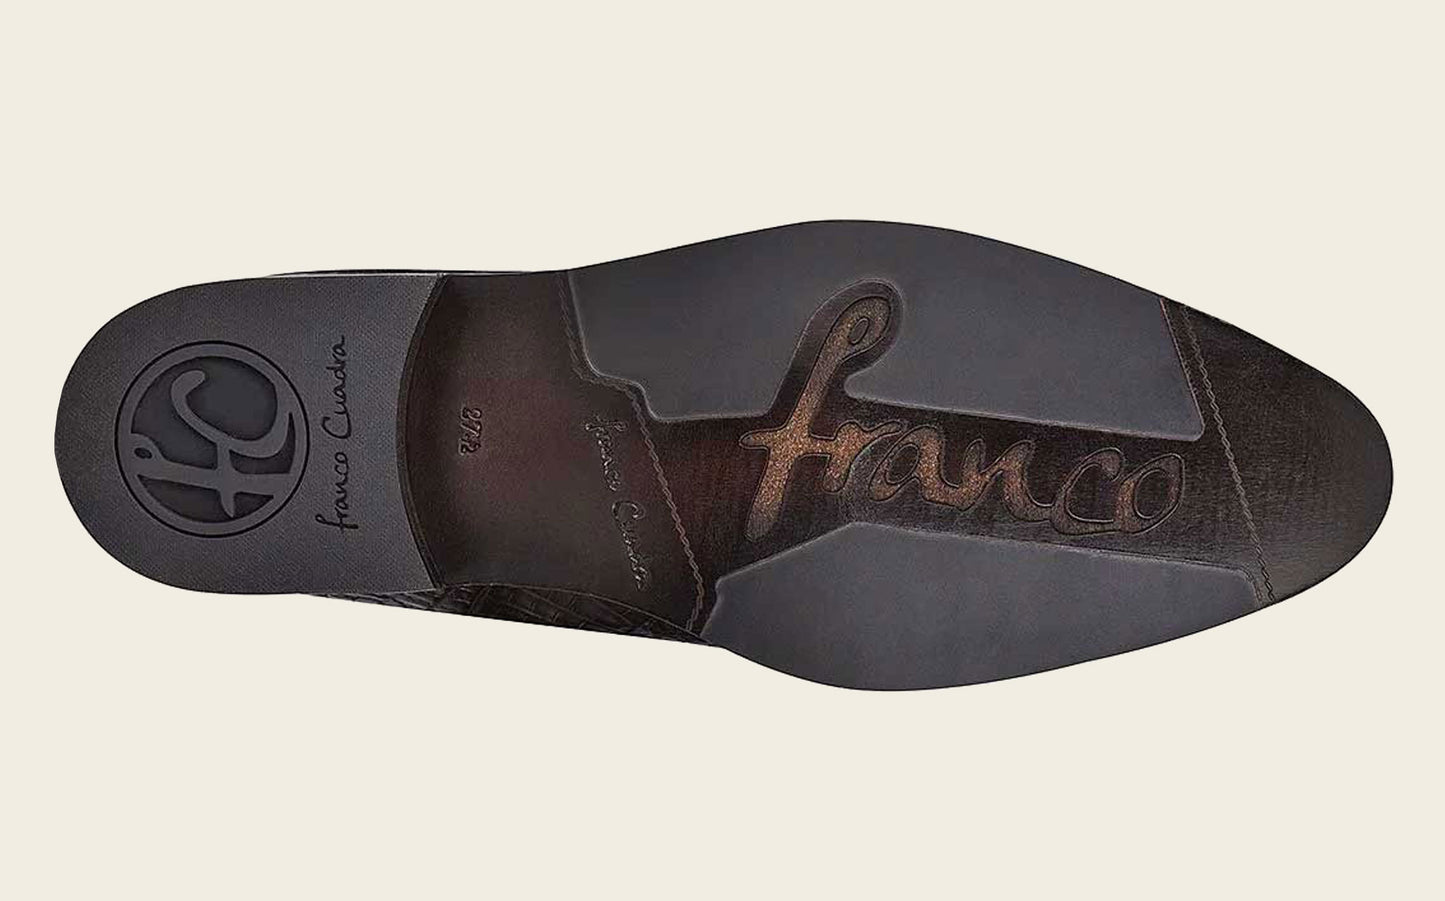 Sophistication & comfort: Embrace luxury with Cuadra's hand-painted boots